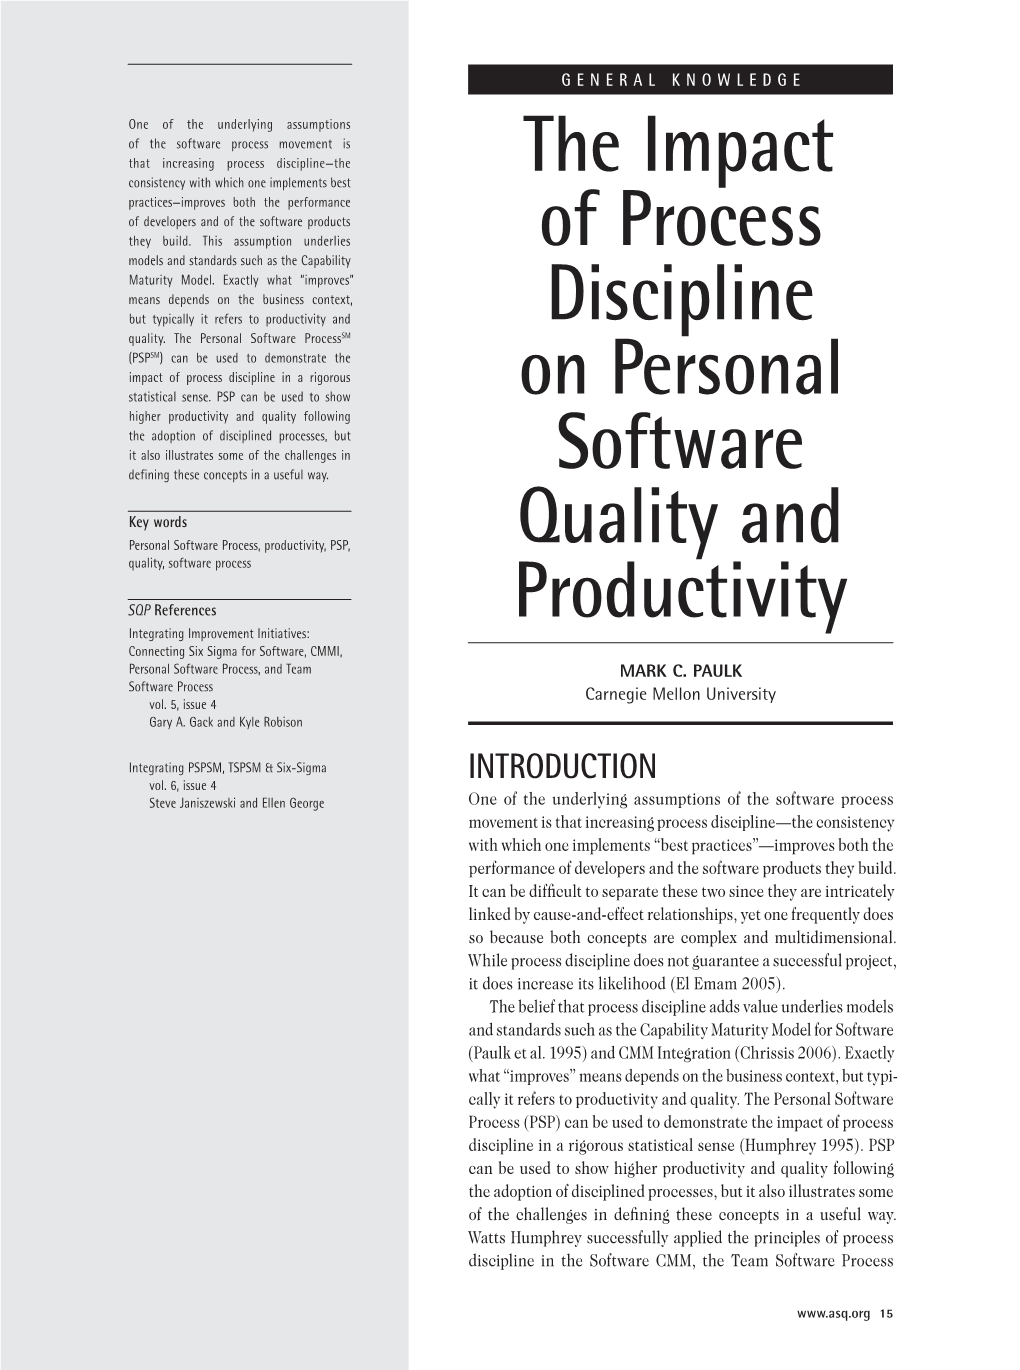 The Impact of Process Discipline on Personal Software Quality and Productivity